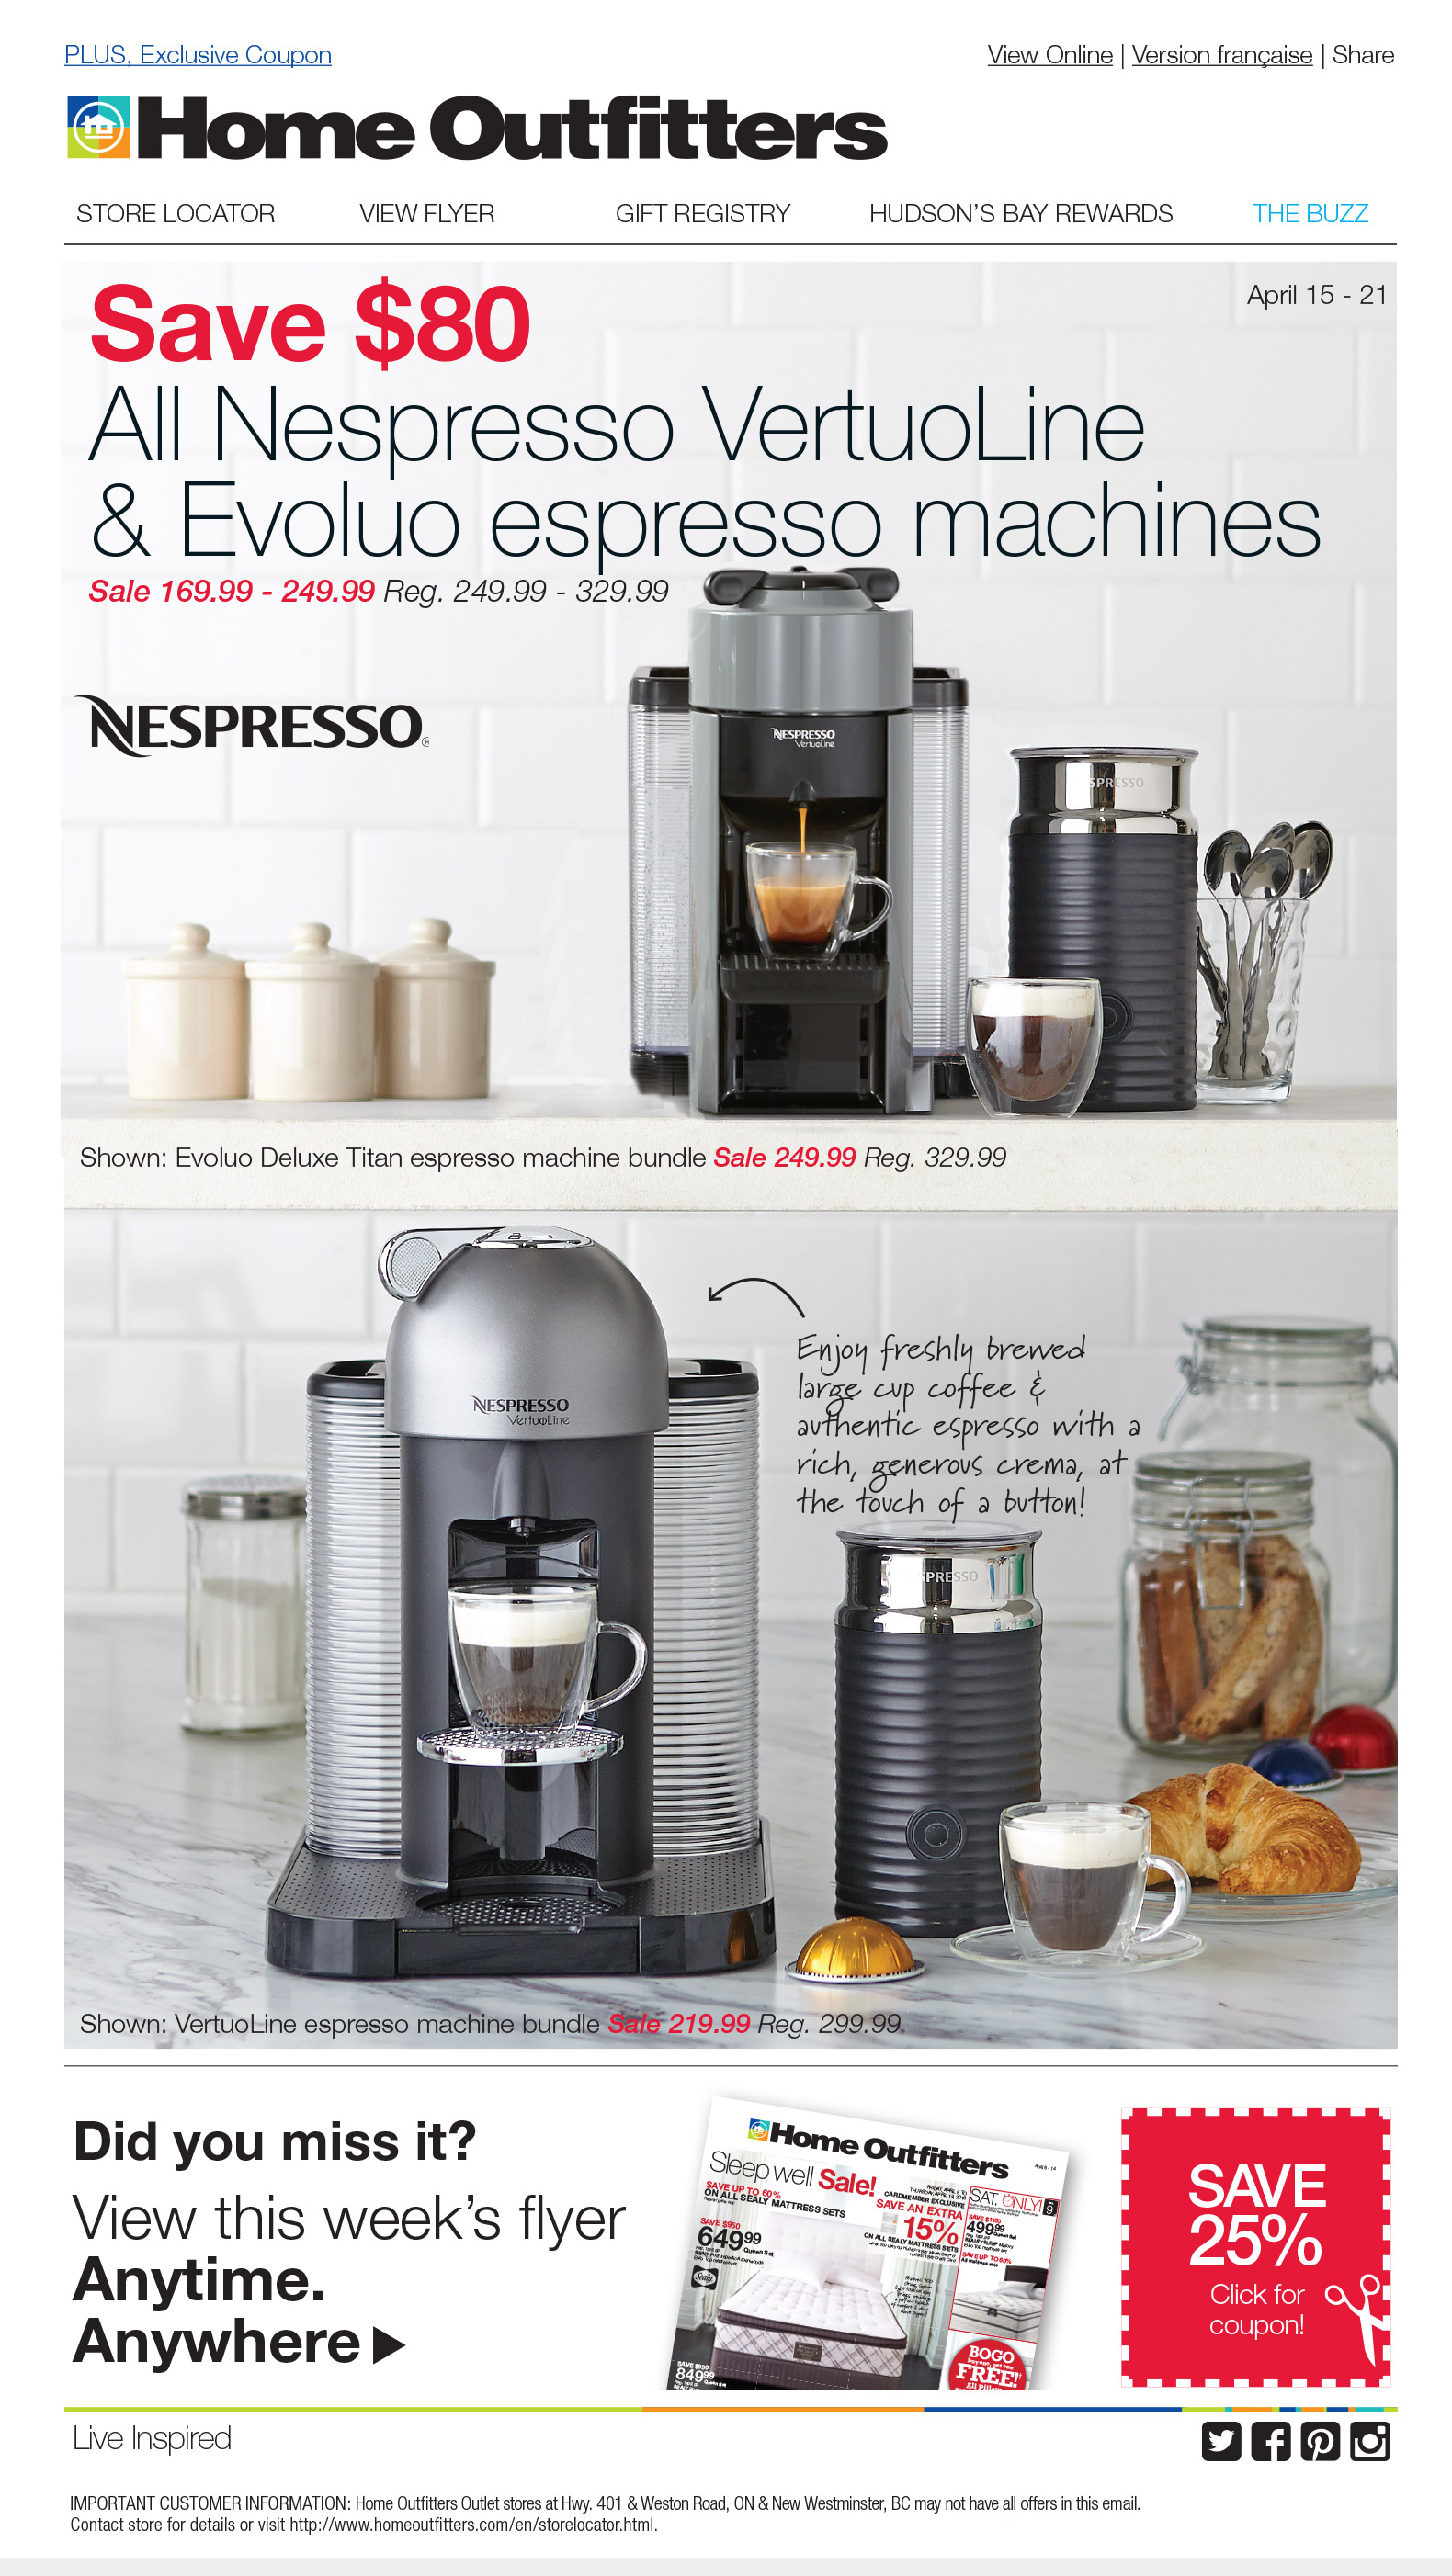 Home Outfitters Nespresso Email Blast Campaign